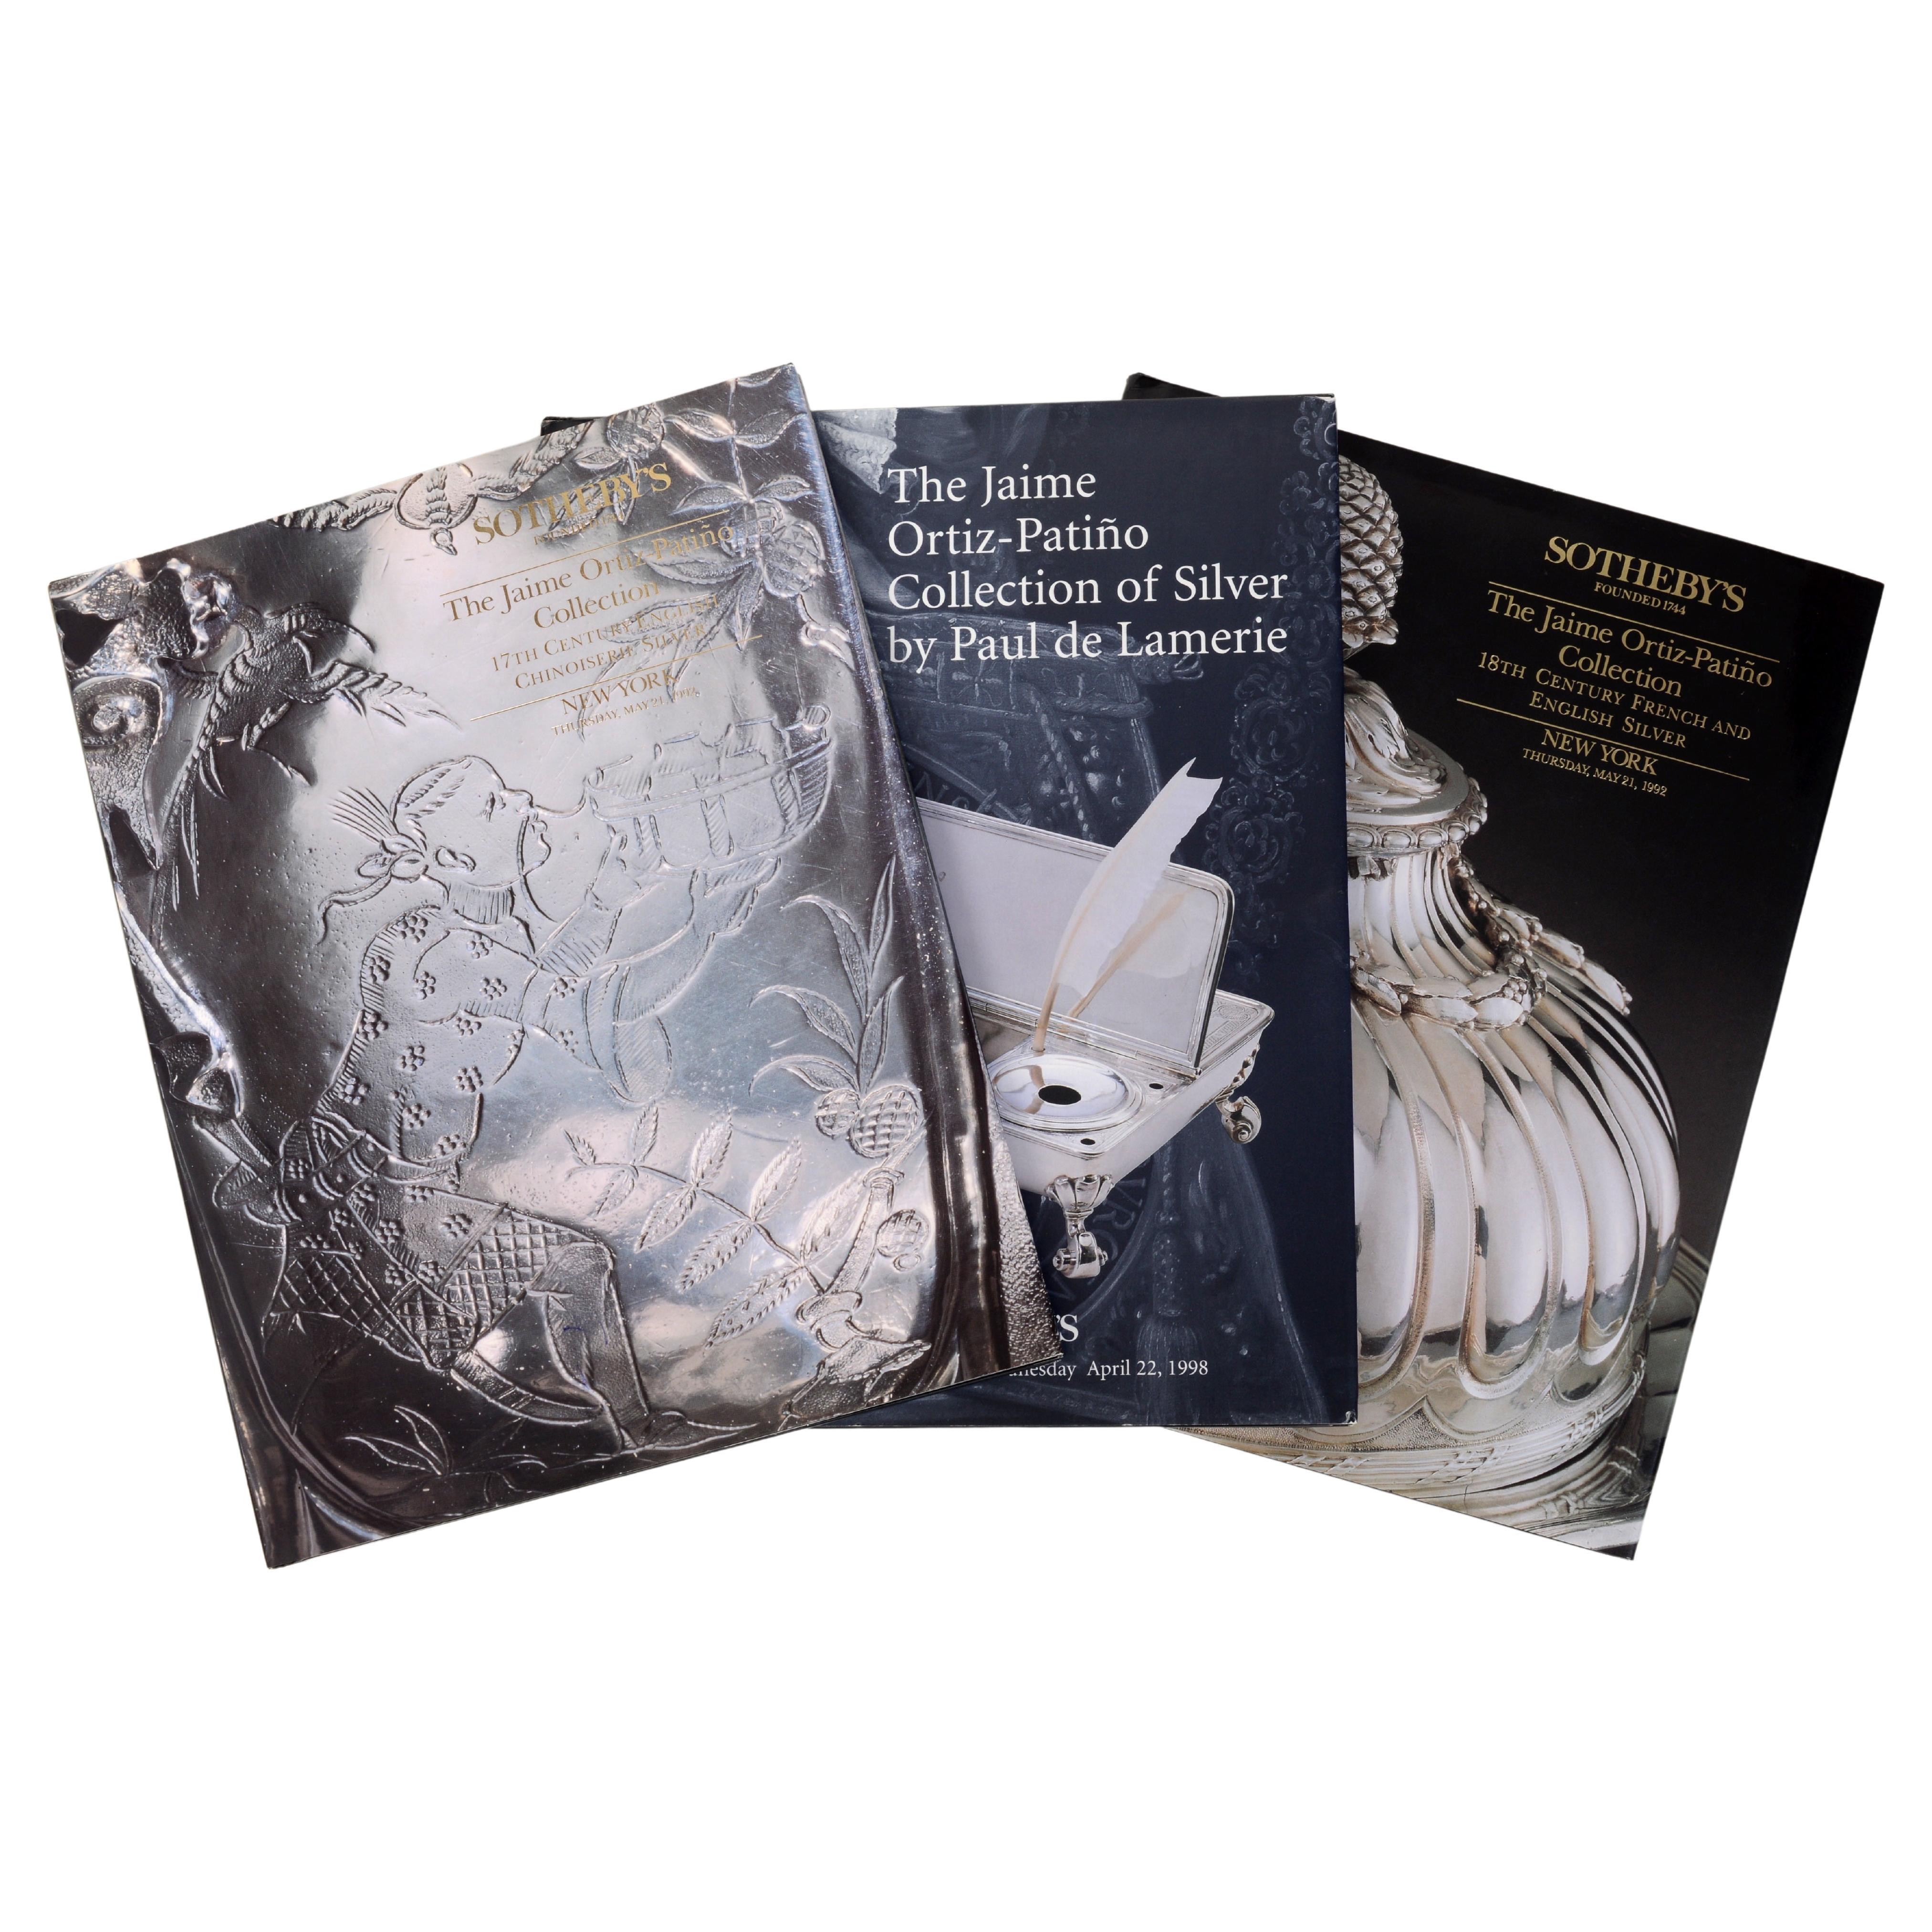 Set of 3 Sotheby's Catalogs: the Jaime Ortiz-patiño Collections of Silver